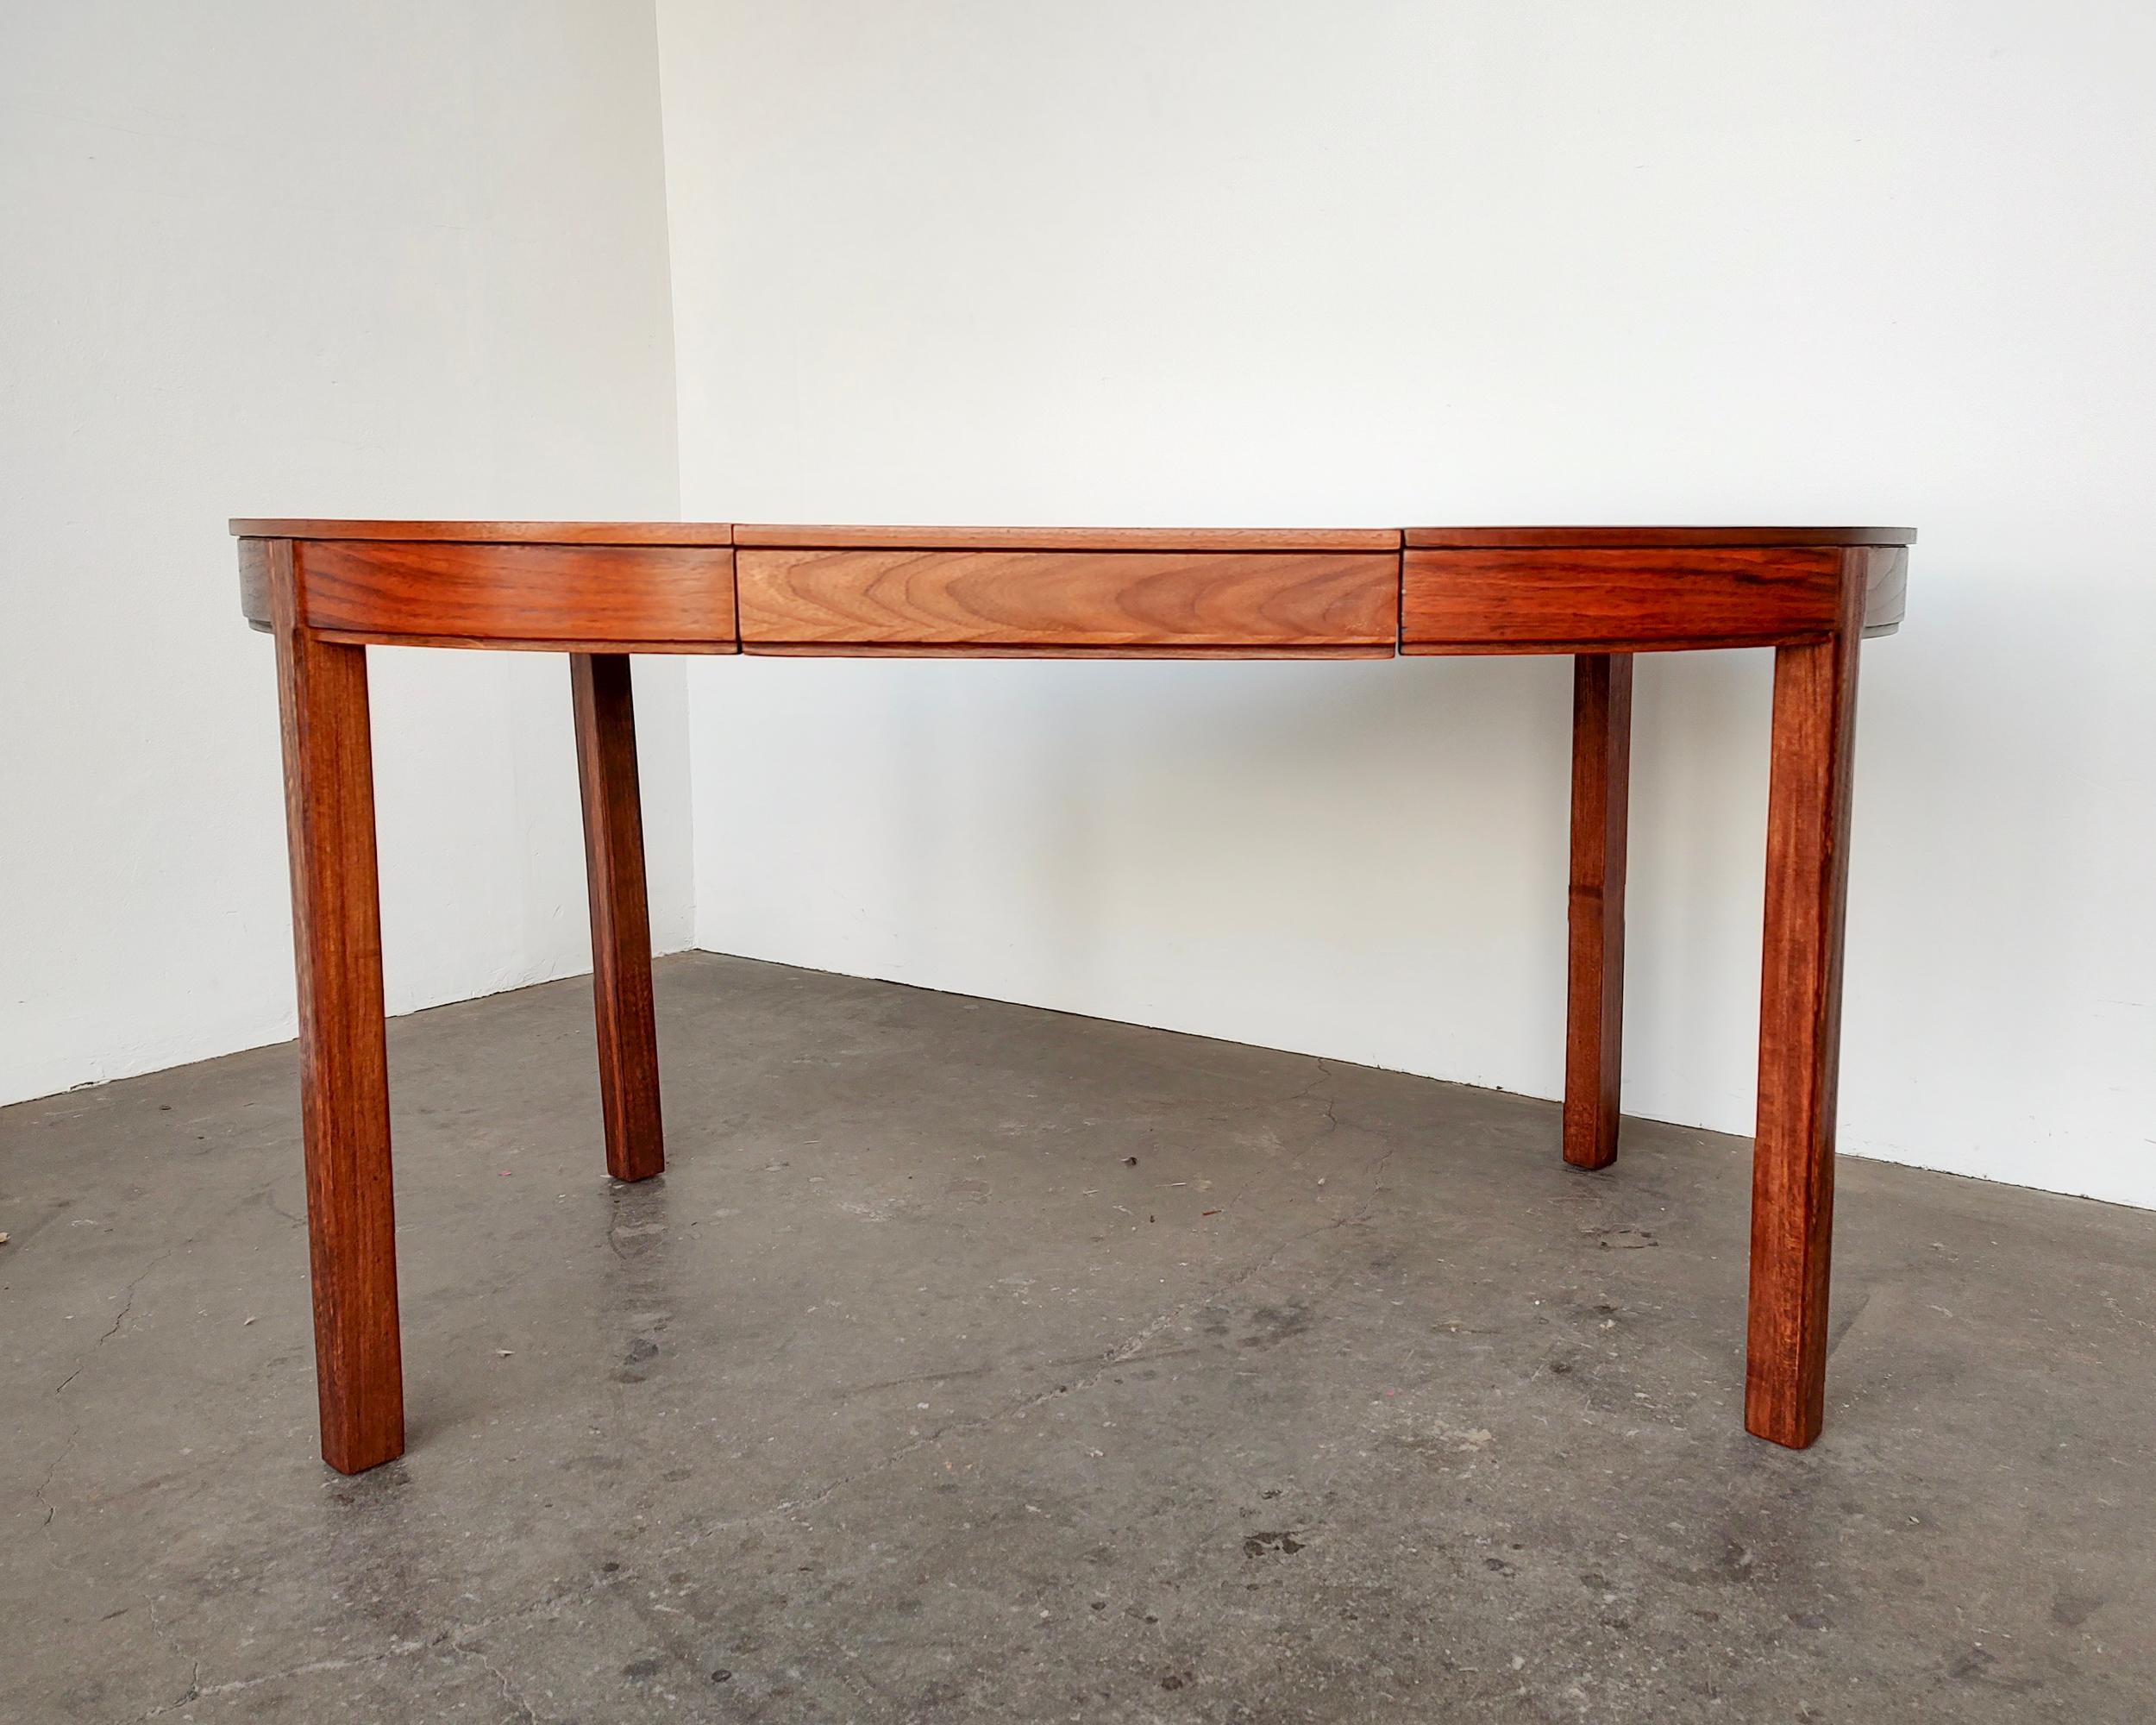 Professionally restored walnut mid-century modern dining table. Expands from small round shape to larger racetrack shape. Gorgeous wood grain throughout. Excellent condition. 

40.5